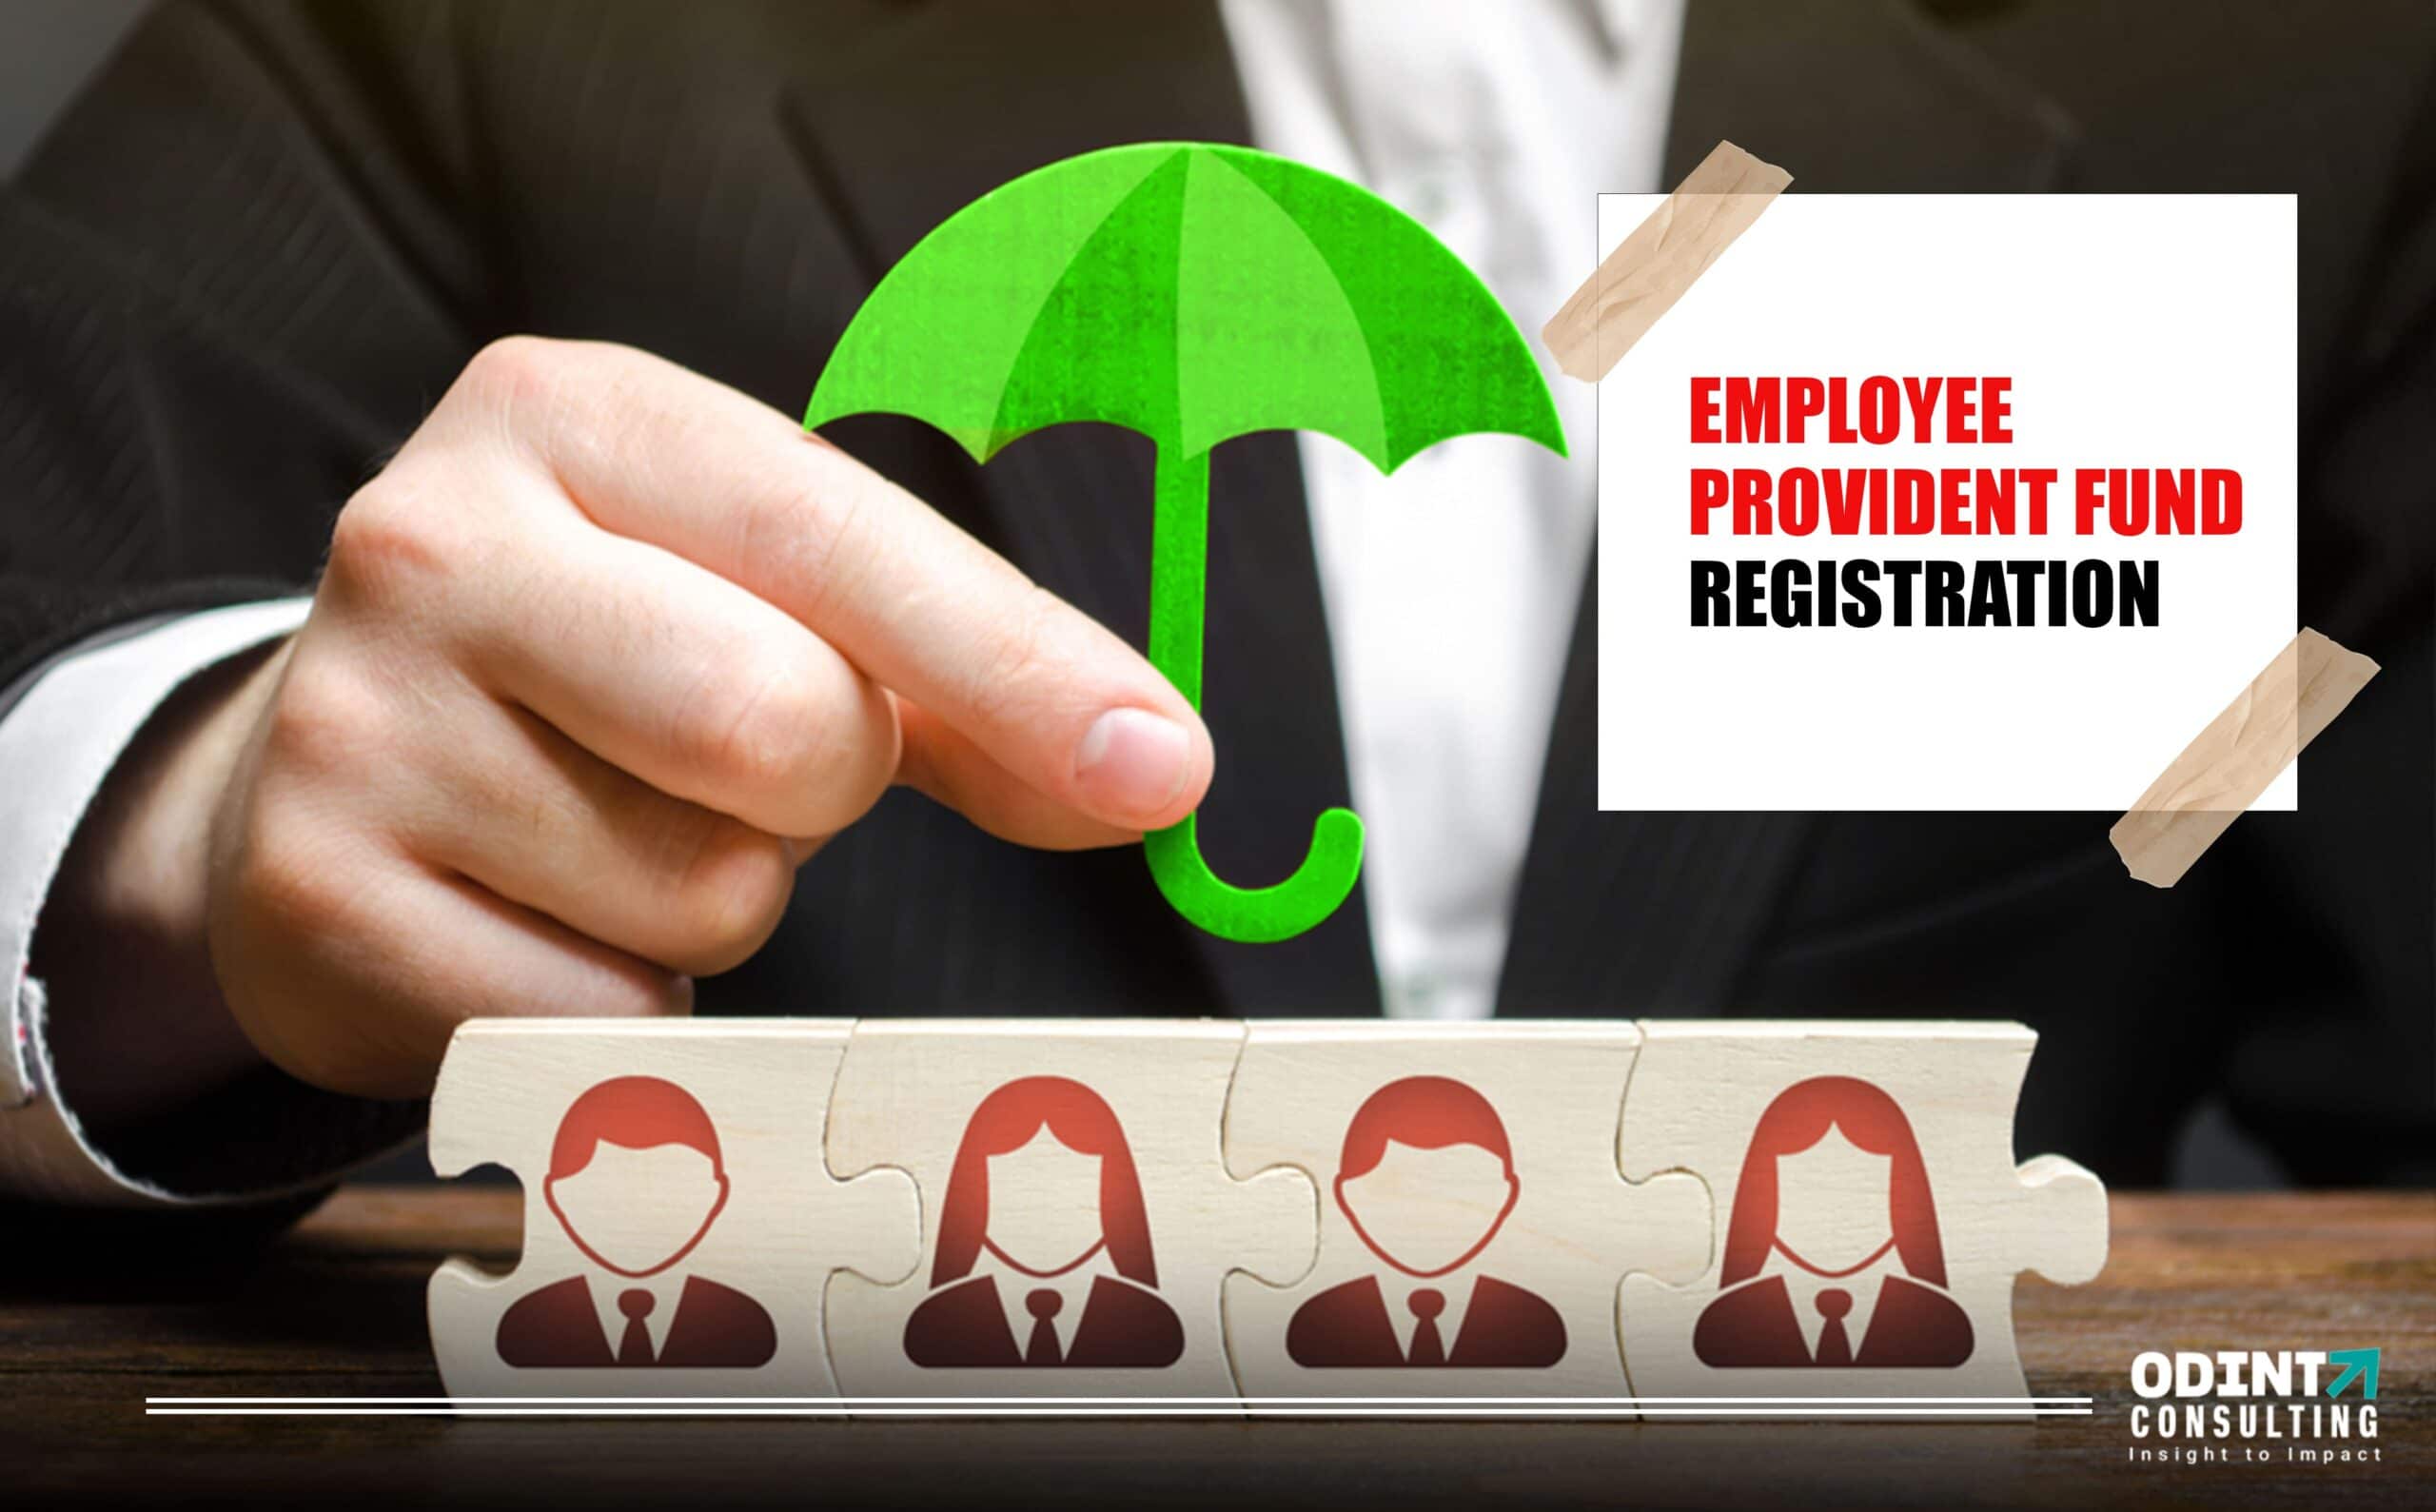 Employee Provident Fund Registration 2022: Advantages, Requirements & Charges